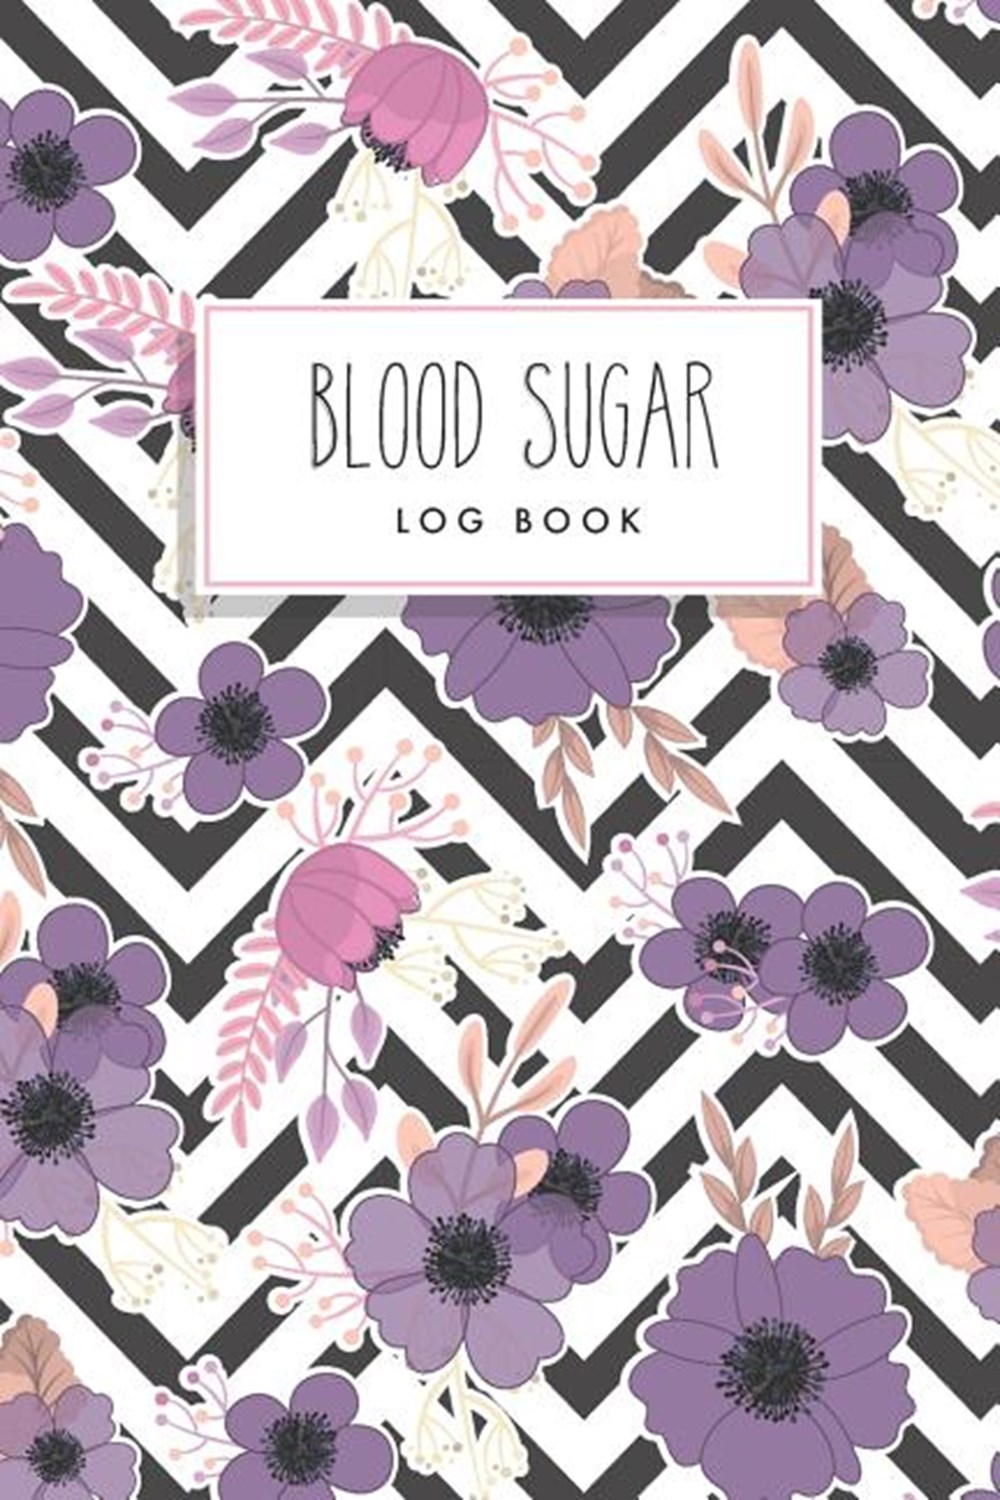 Blood Sugar Log Book Cute Flower Cover - 53 Weeks Daily Record Book for Blood Sugar Monitoring Level